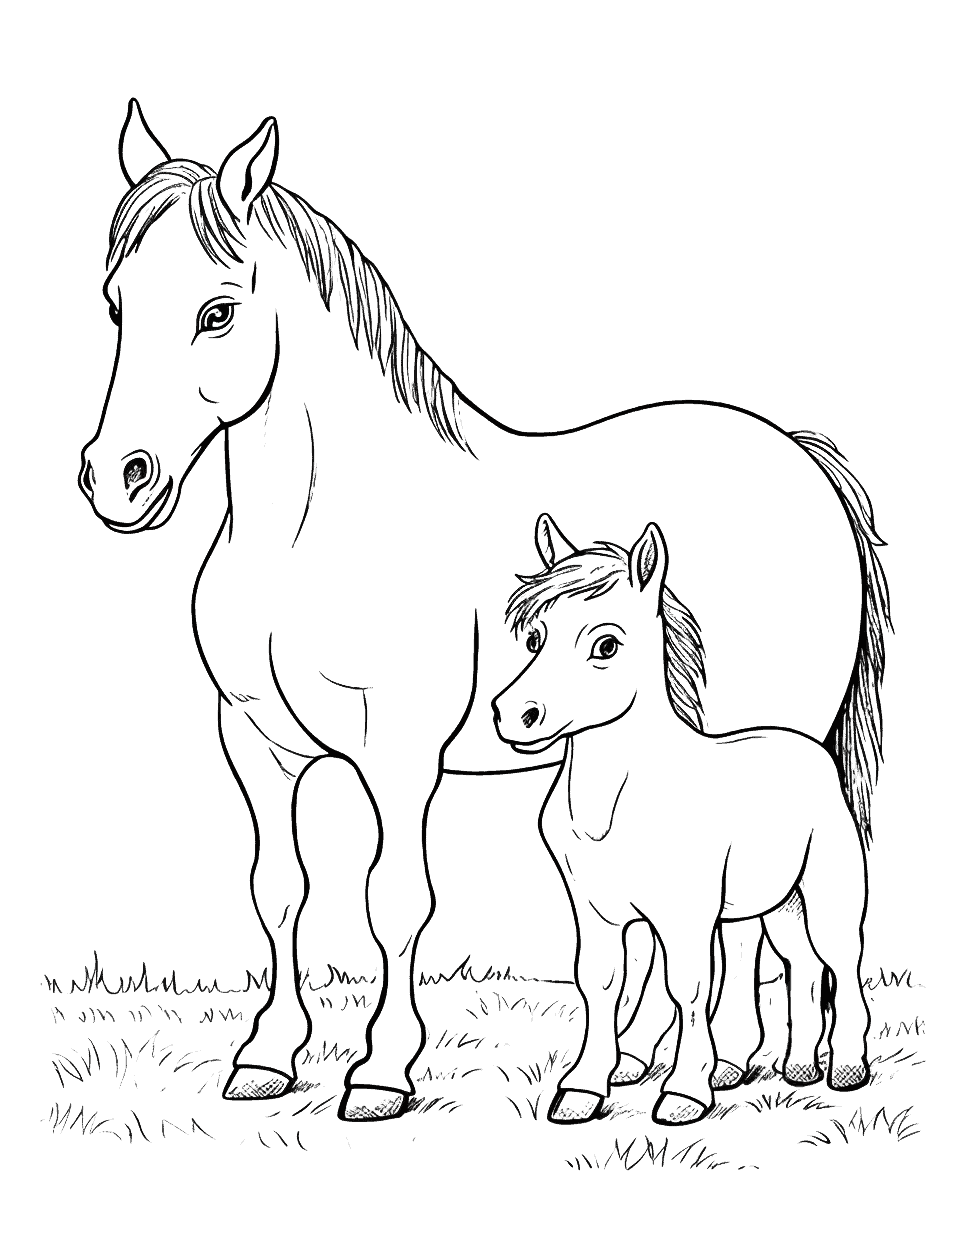 Adorable Baby Horse and Mom Coloring Page - A baby horse (foal) and her mother standing together in the field.